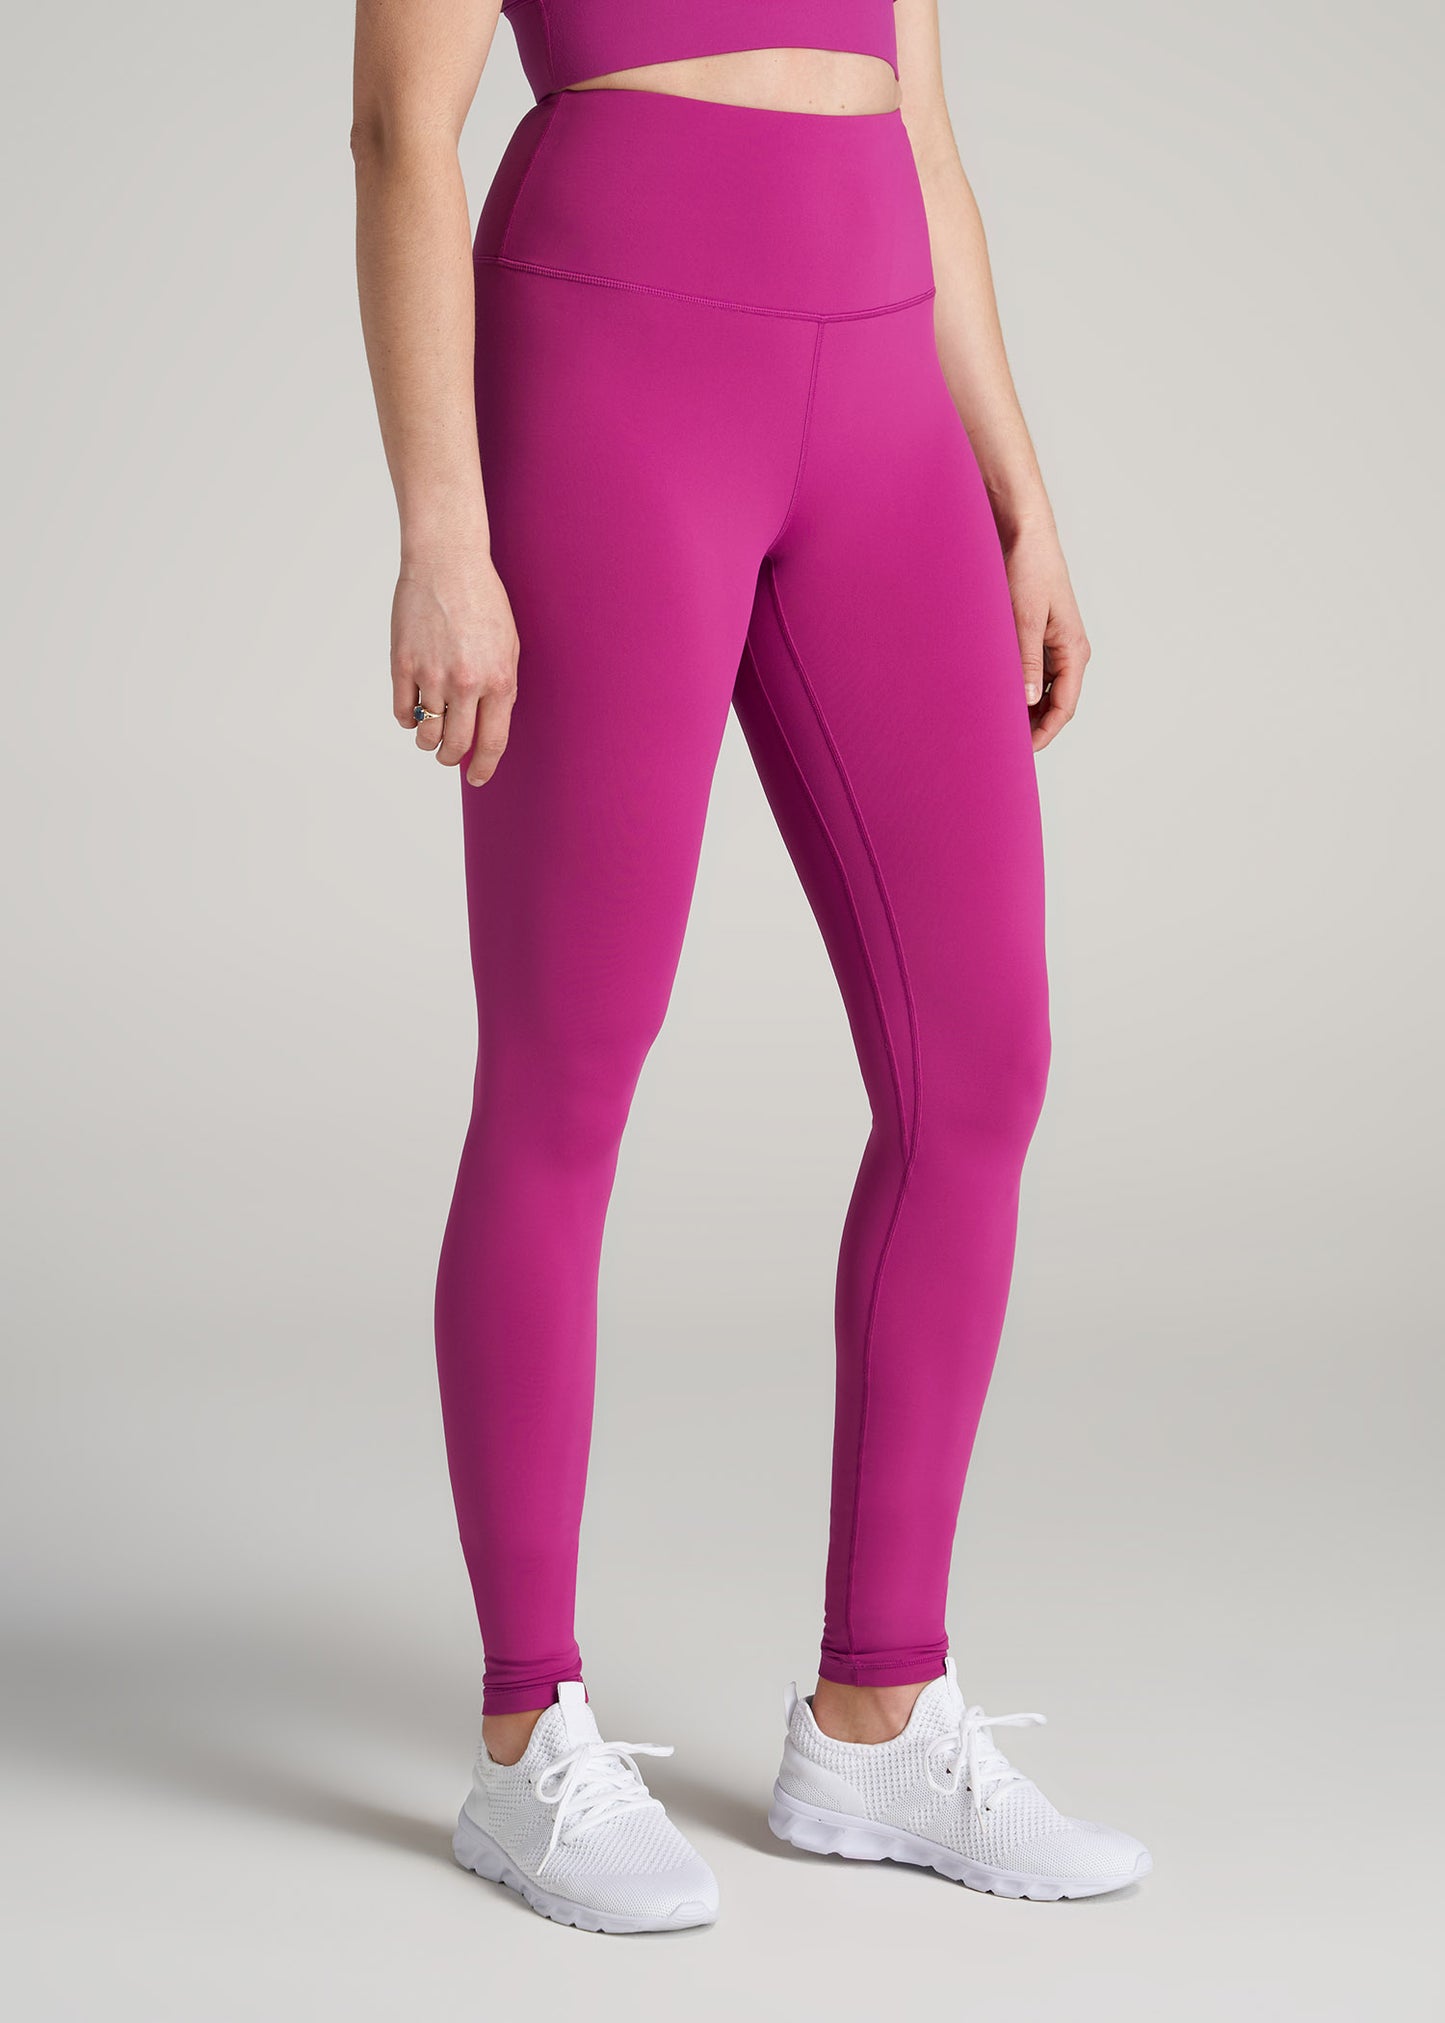 Harmony and Balance Pink Active Pants Size L - 52% off